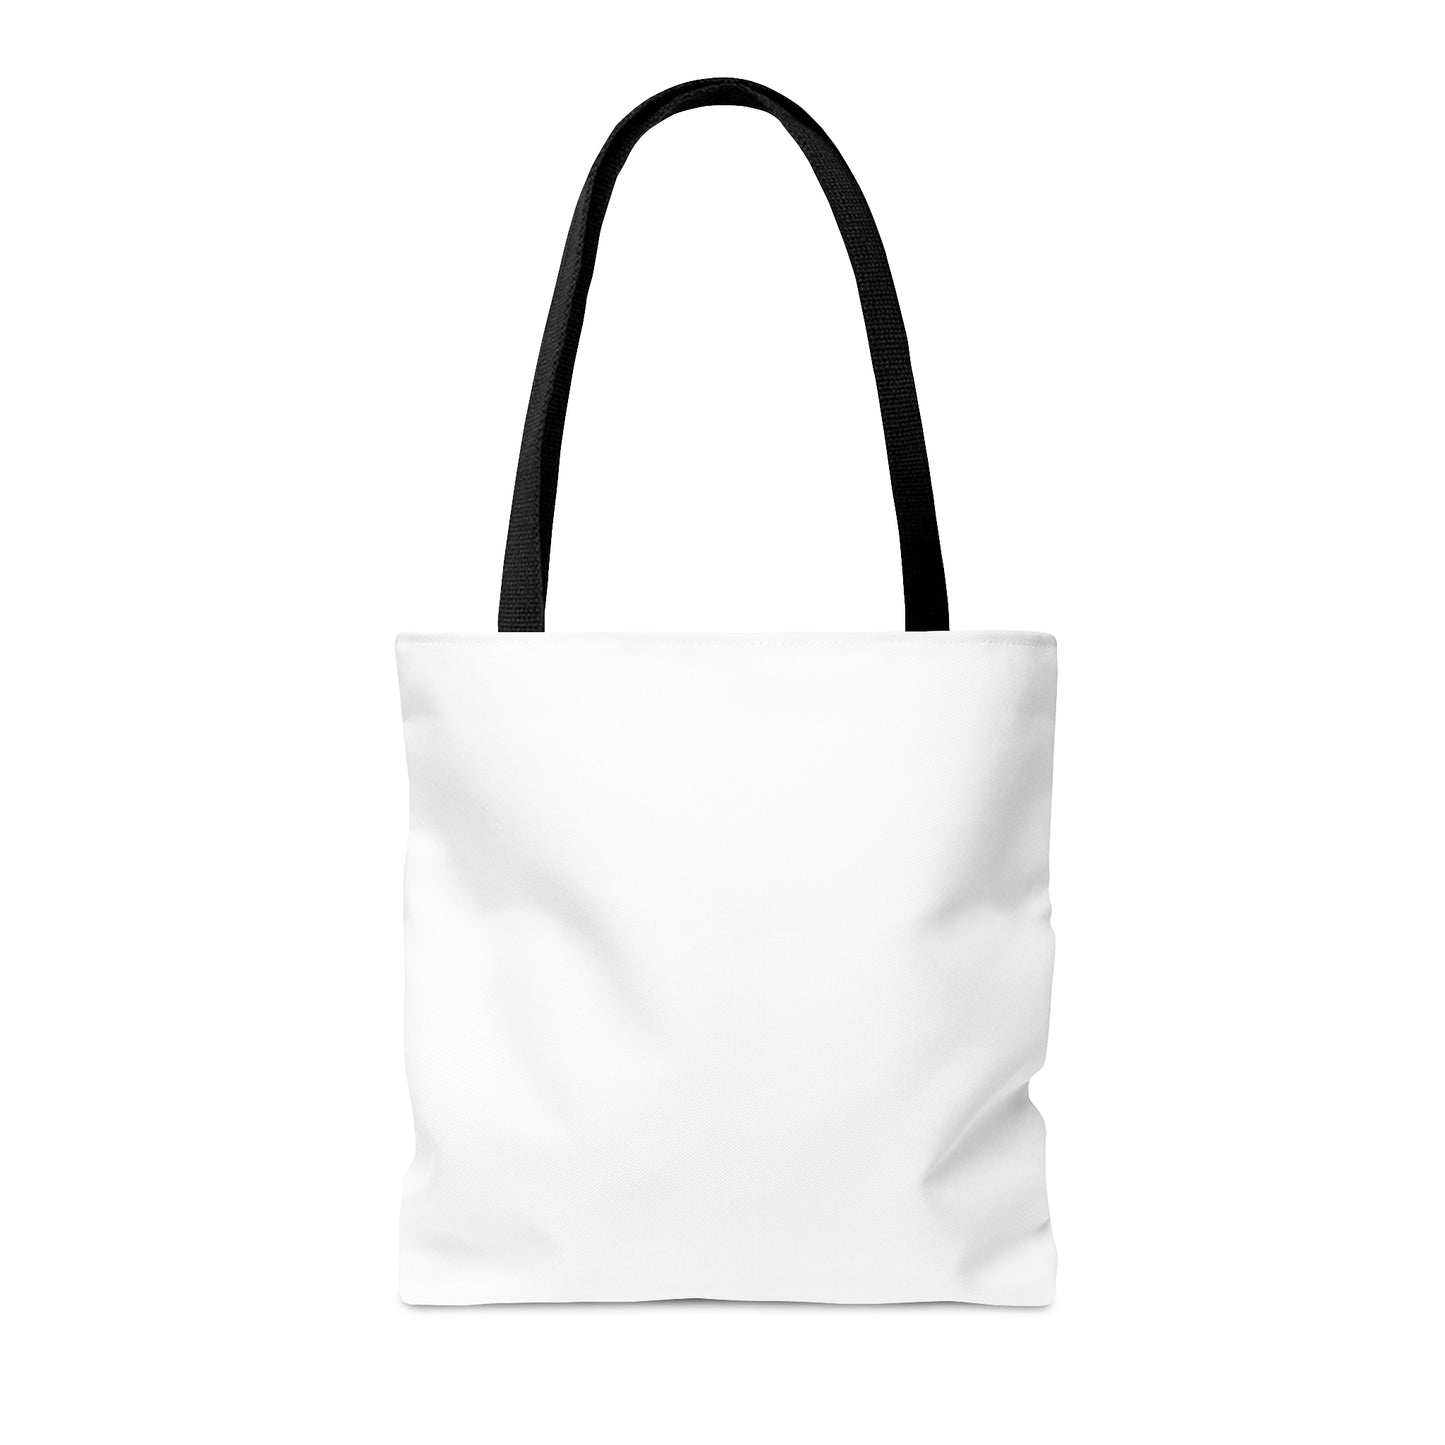 Read More Poetry Tote